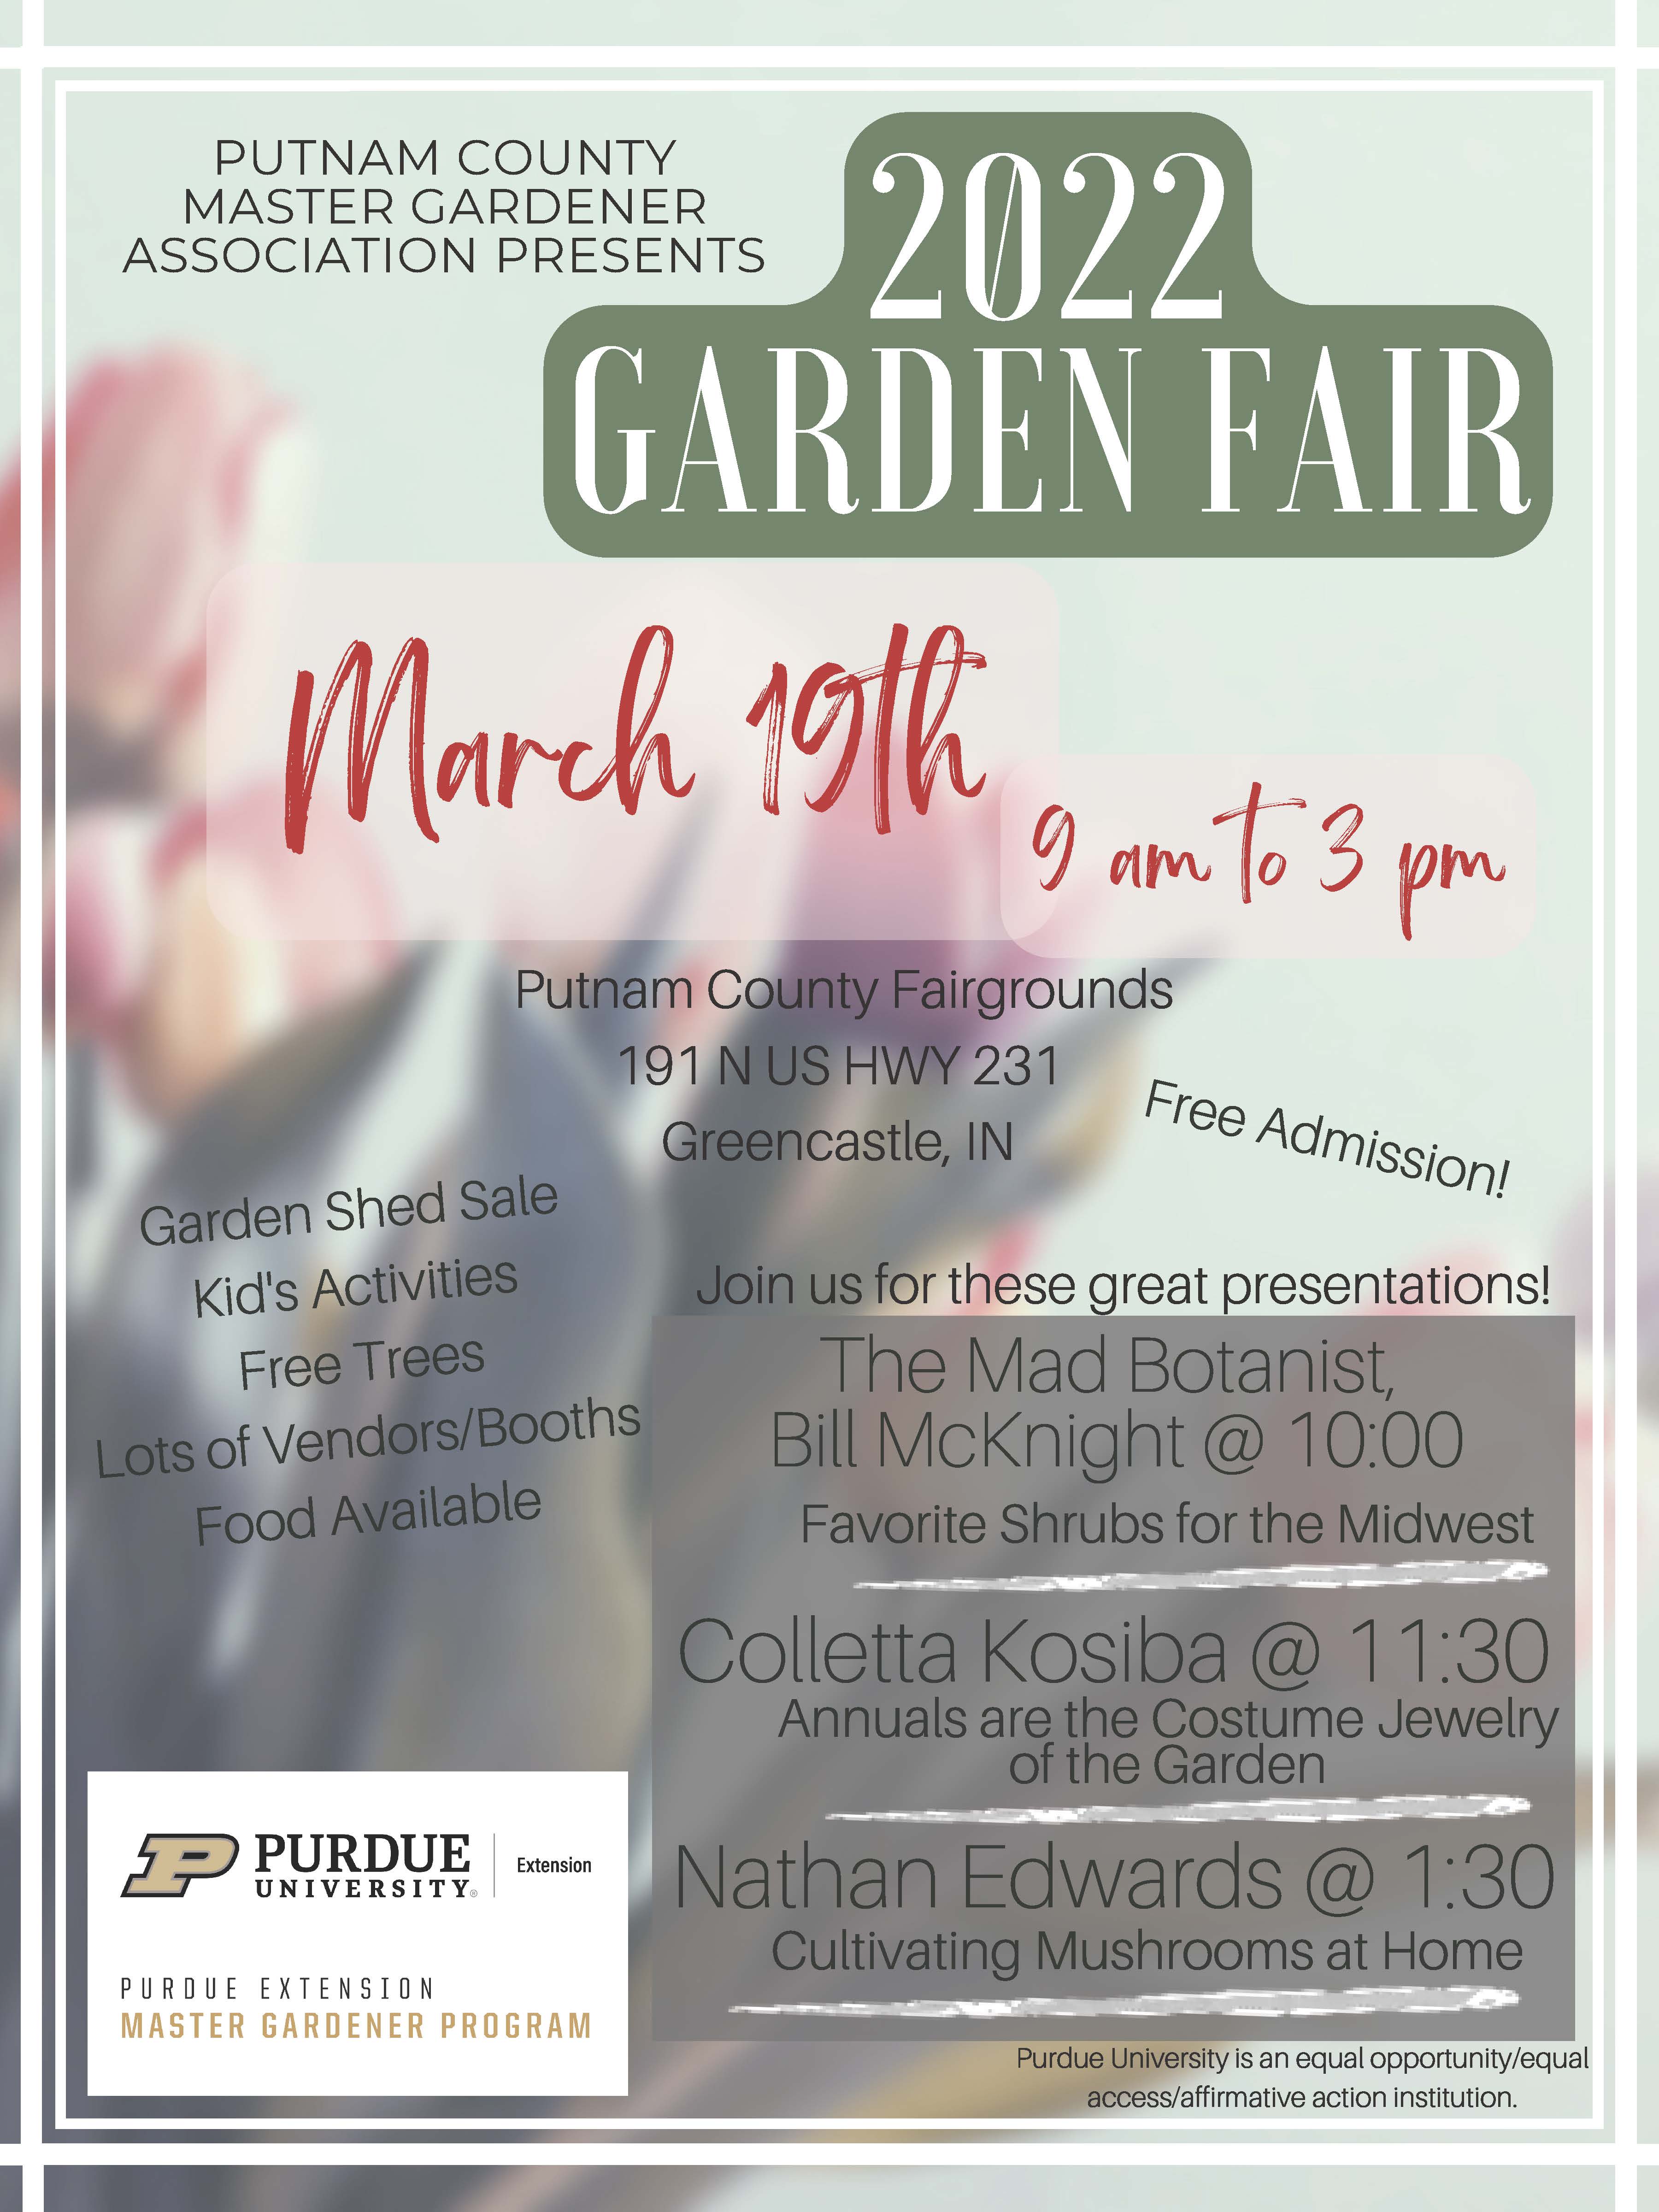 Flyer for Garden Fair March 19, 2022 at the Putnam County Fairgrounds